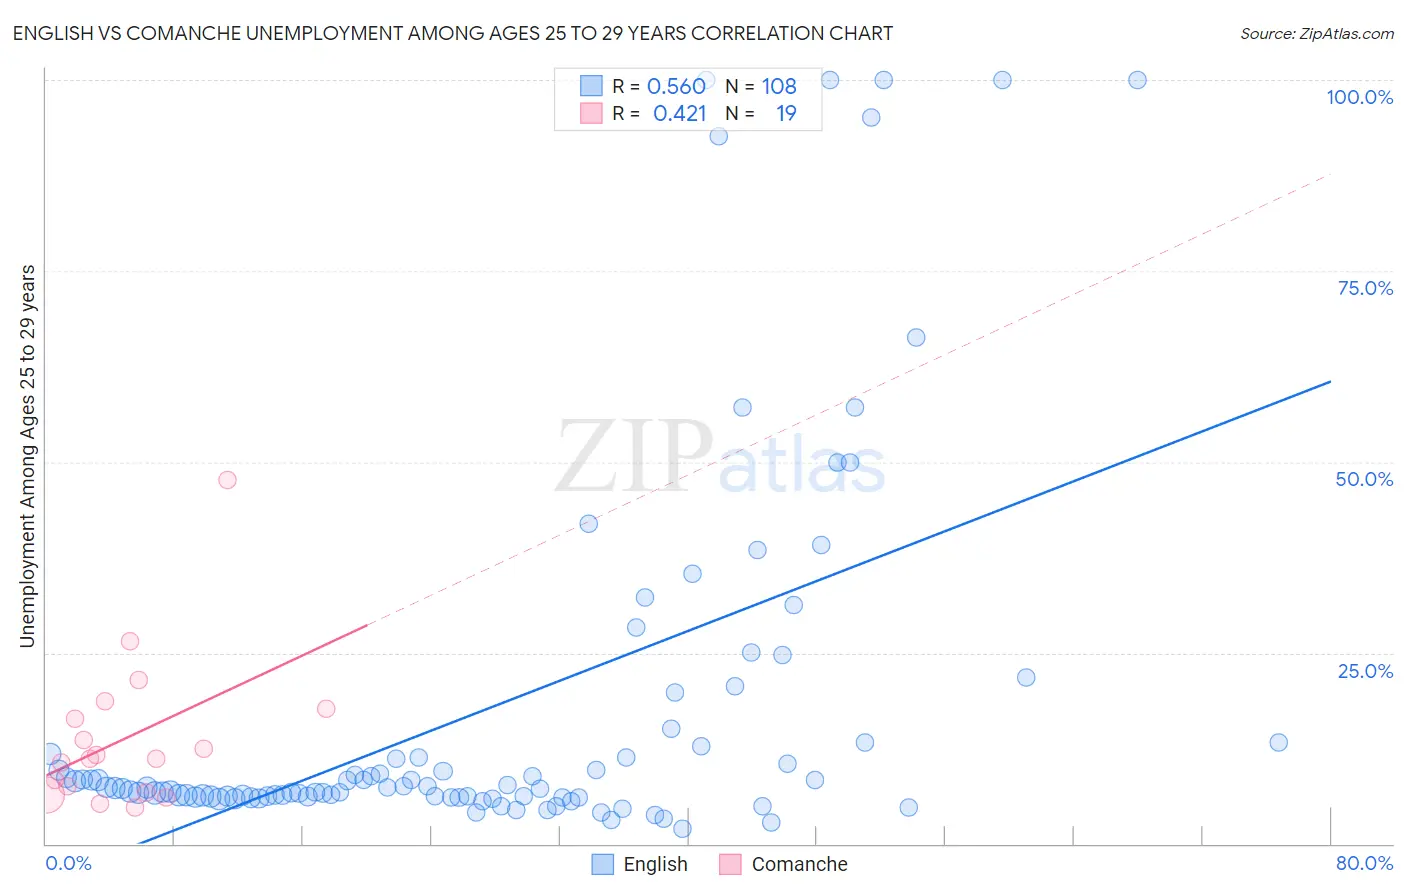 English vs Comanche Unemployment Among Ages 25 to 29 years